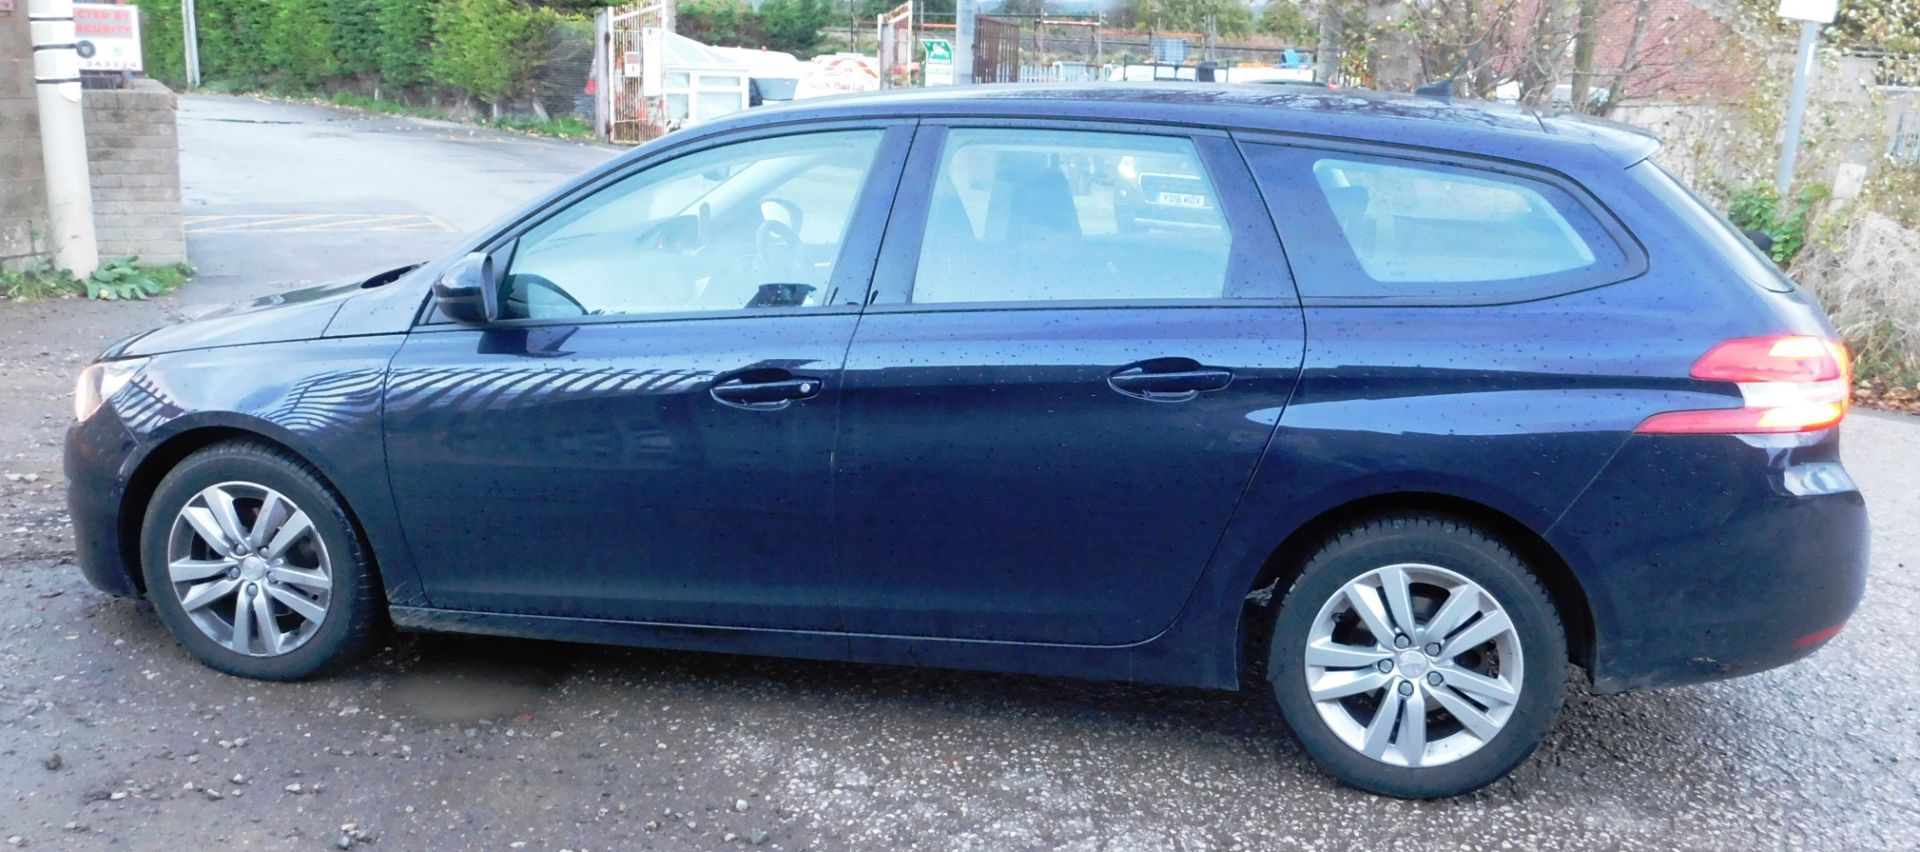 Peugeot 308 SW Active Blue S/S 1.6HDI manual five - Image 7 of 13